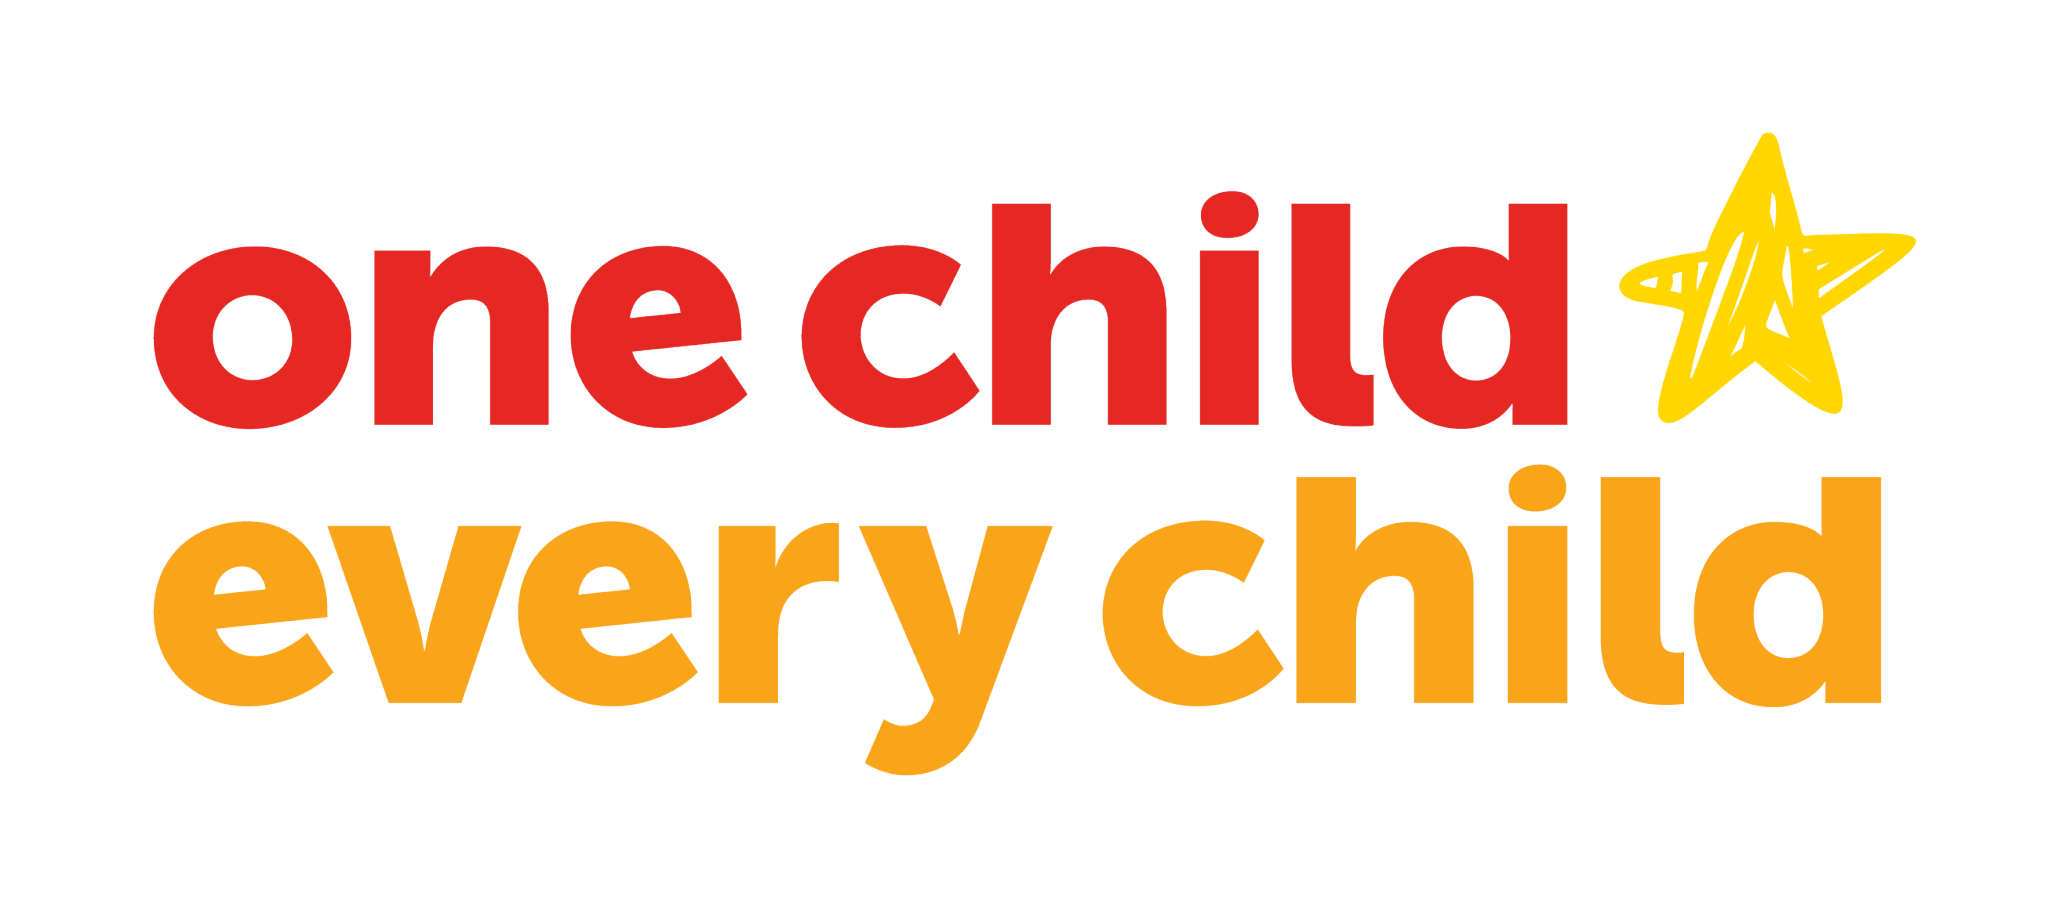 https://research.ucalgary.ca/research/our-impact/one-child-every-child